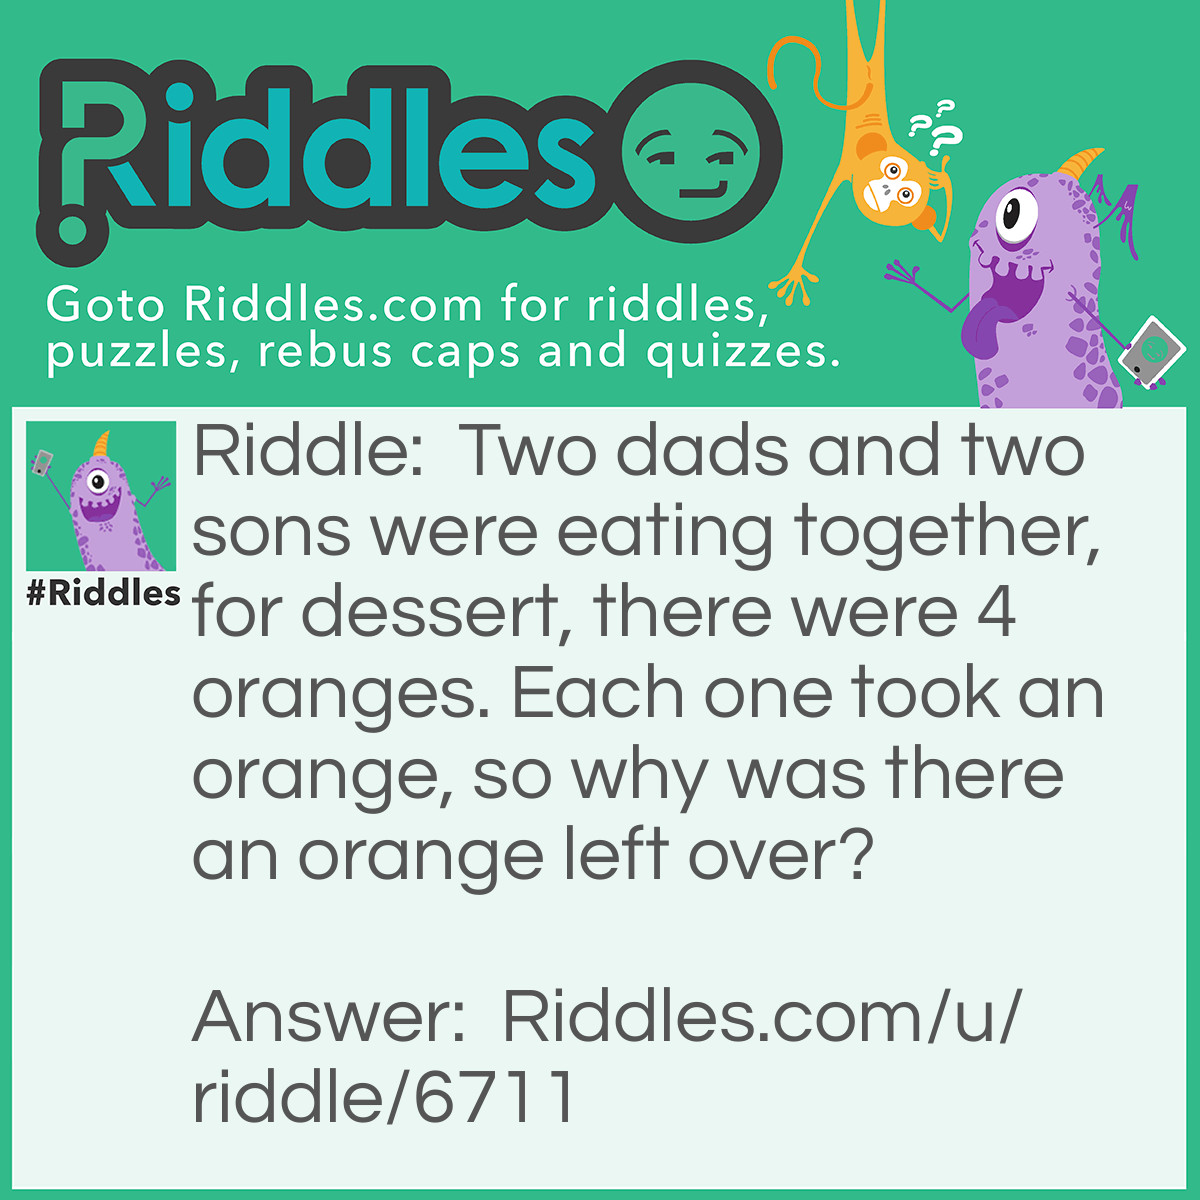 Riddle: Two dads and two sons were eating together, for dessert, there were 4 oranges. Each one took an orange, so why was there an orange left over? Answer: There were two dads and two sons, the Son was the son of the Father and the Father was the son of the Grandfather. The Grandfather was the father of the Father and the Father was the father of his son. That makes two sons and two dads, but actually, only three people were present.